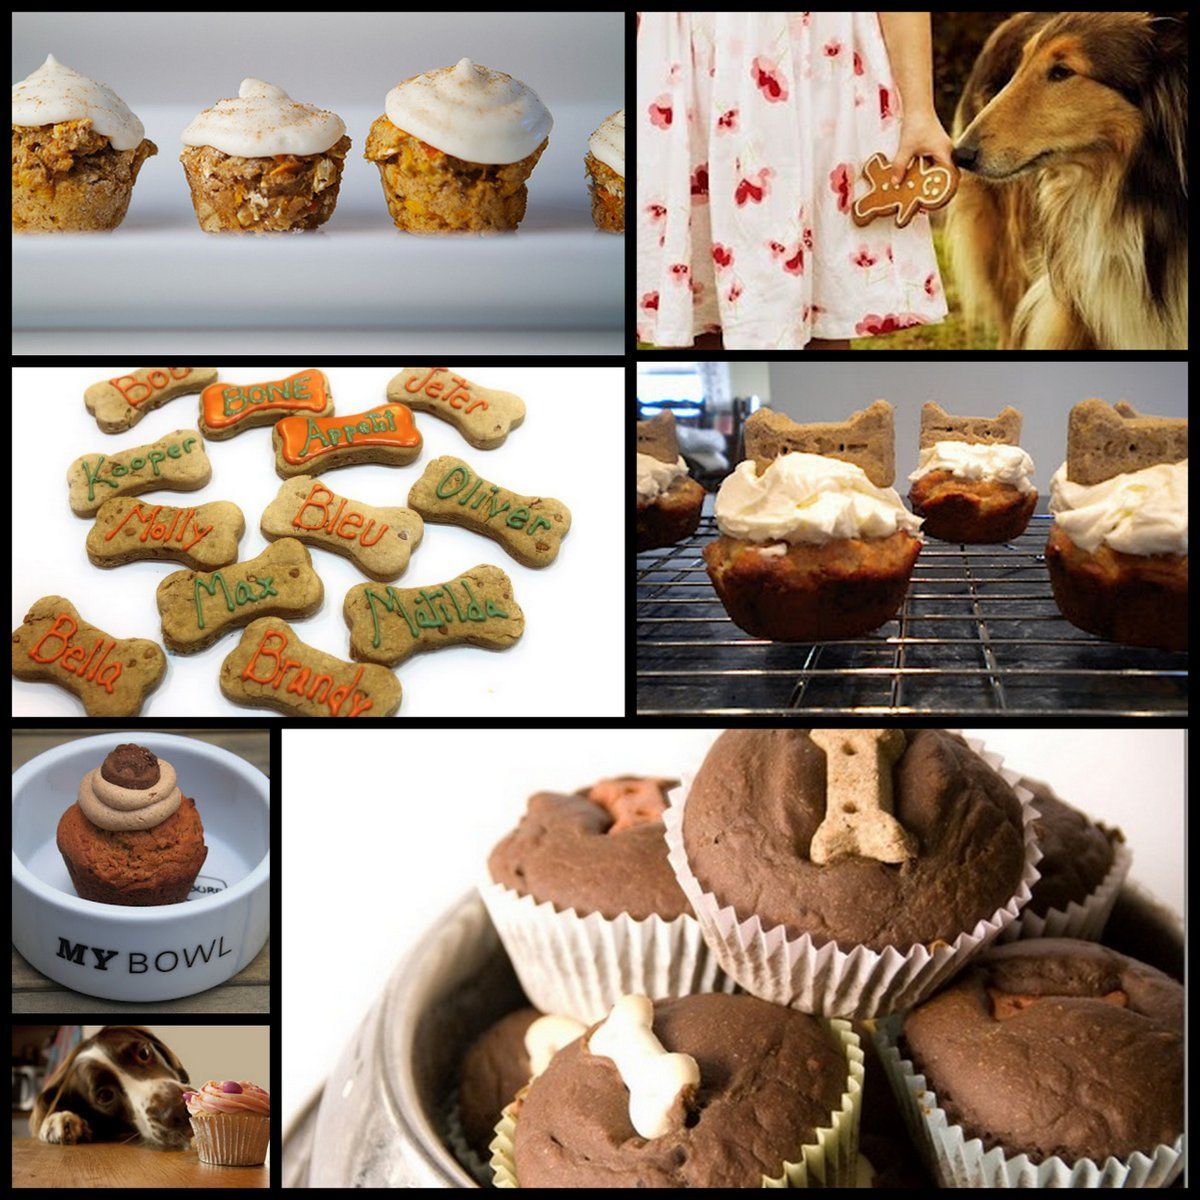 Cupcakes and Pupcakes – Delicious treat recipes to bake for your dog. Getting re